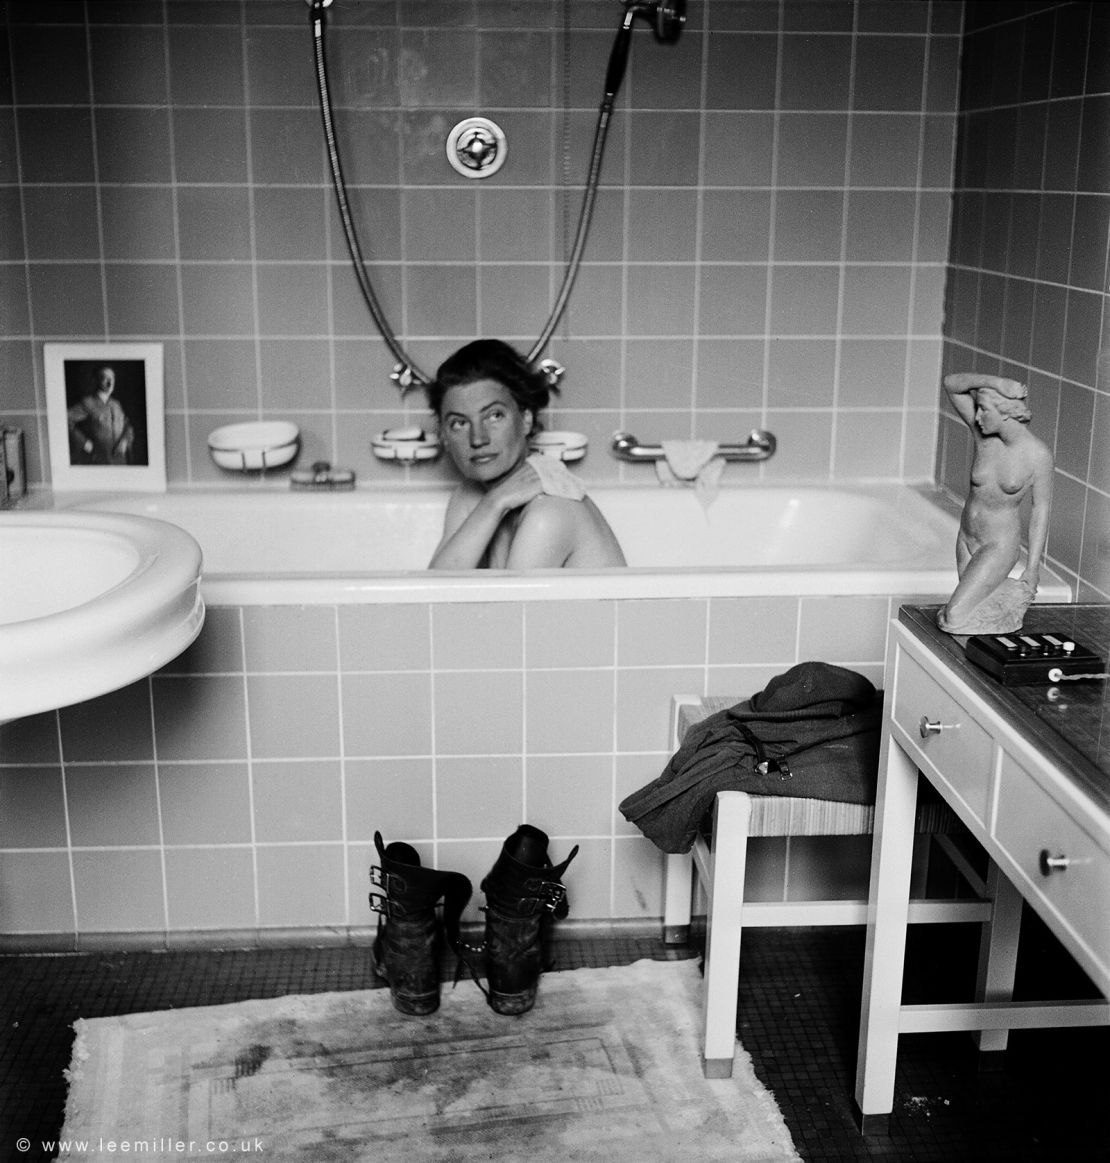 This portrait of Miller in Hitler's bathtub in Munich on the day of his death — her boots dirtying his bathmat — has become one of the images for which she is most known.